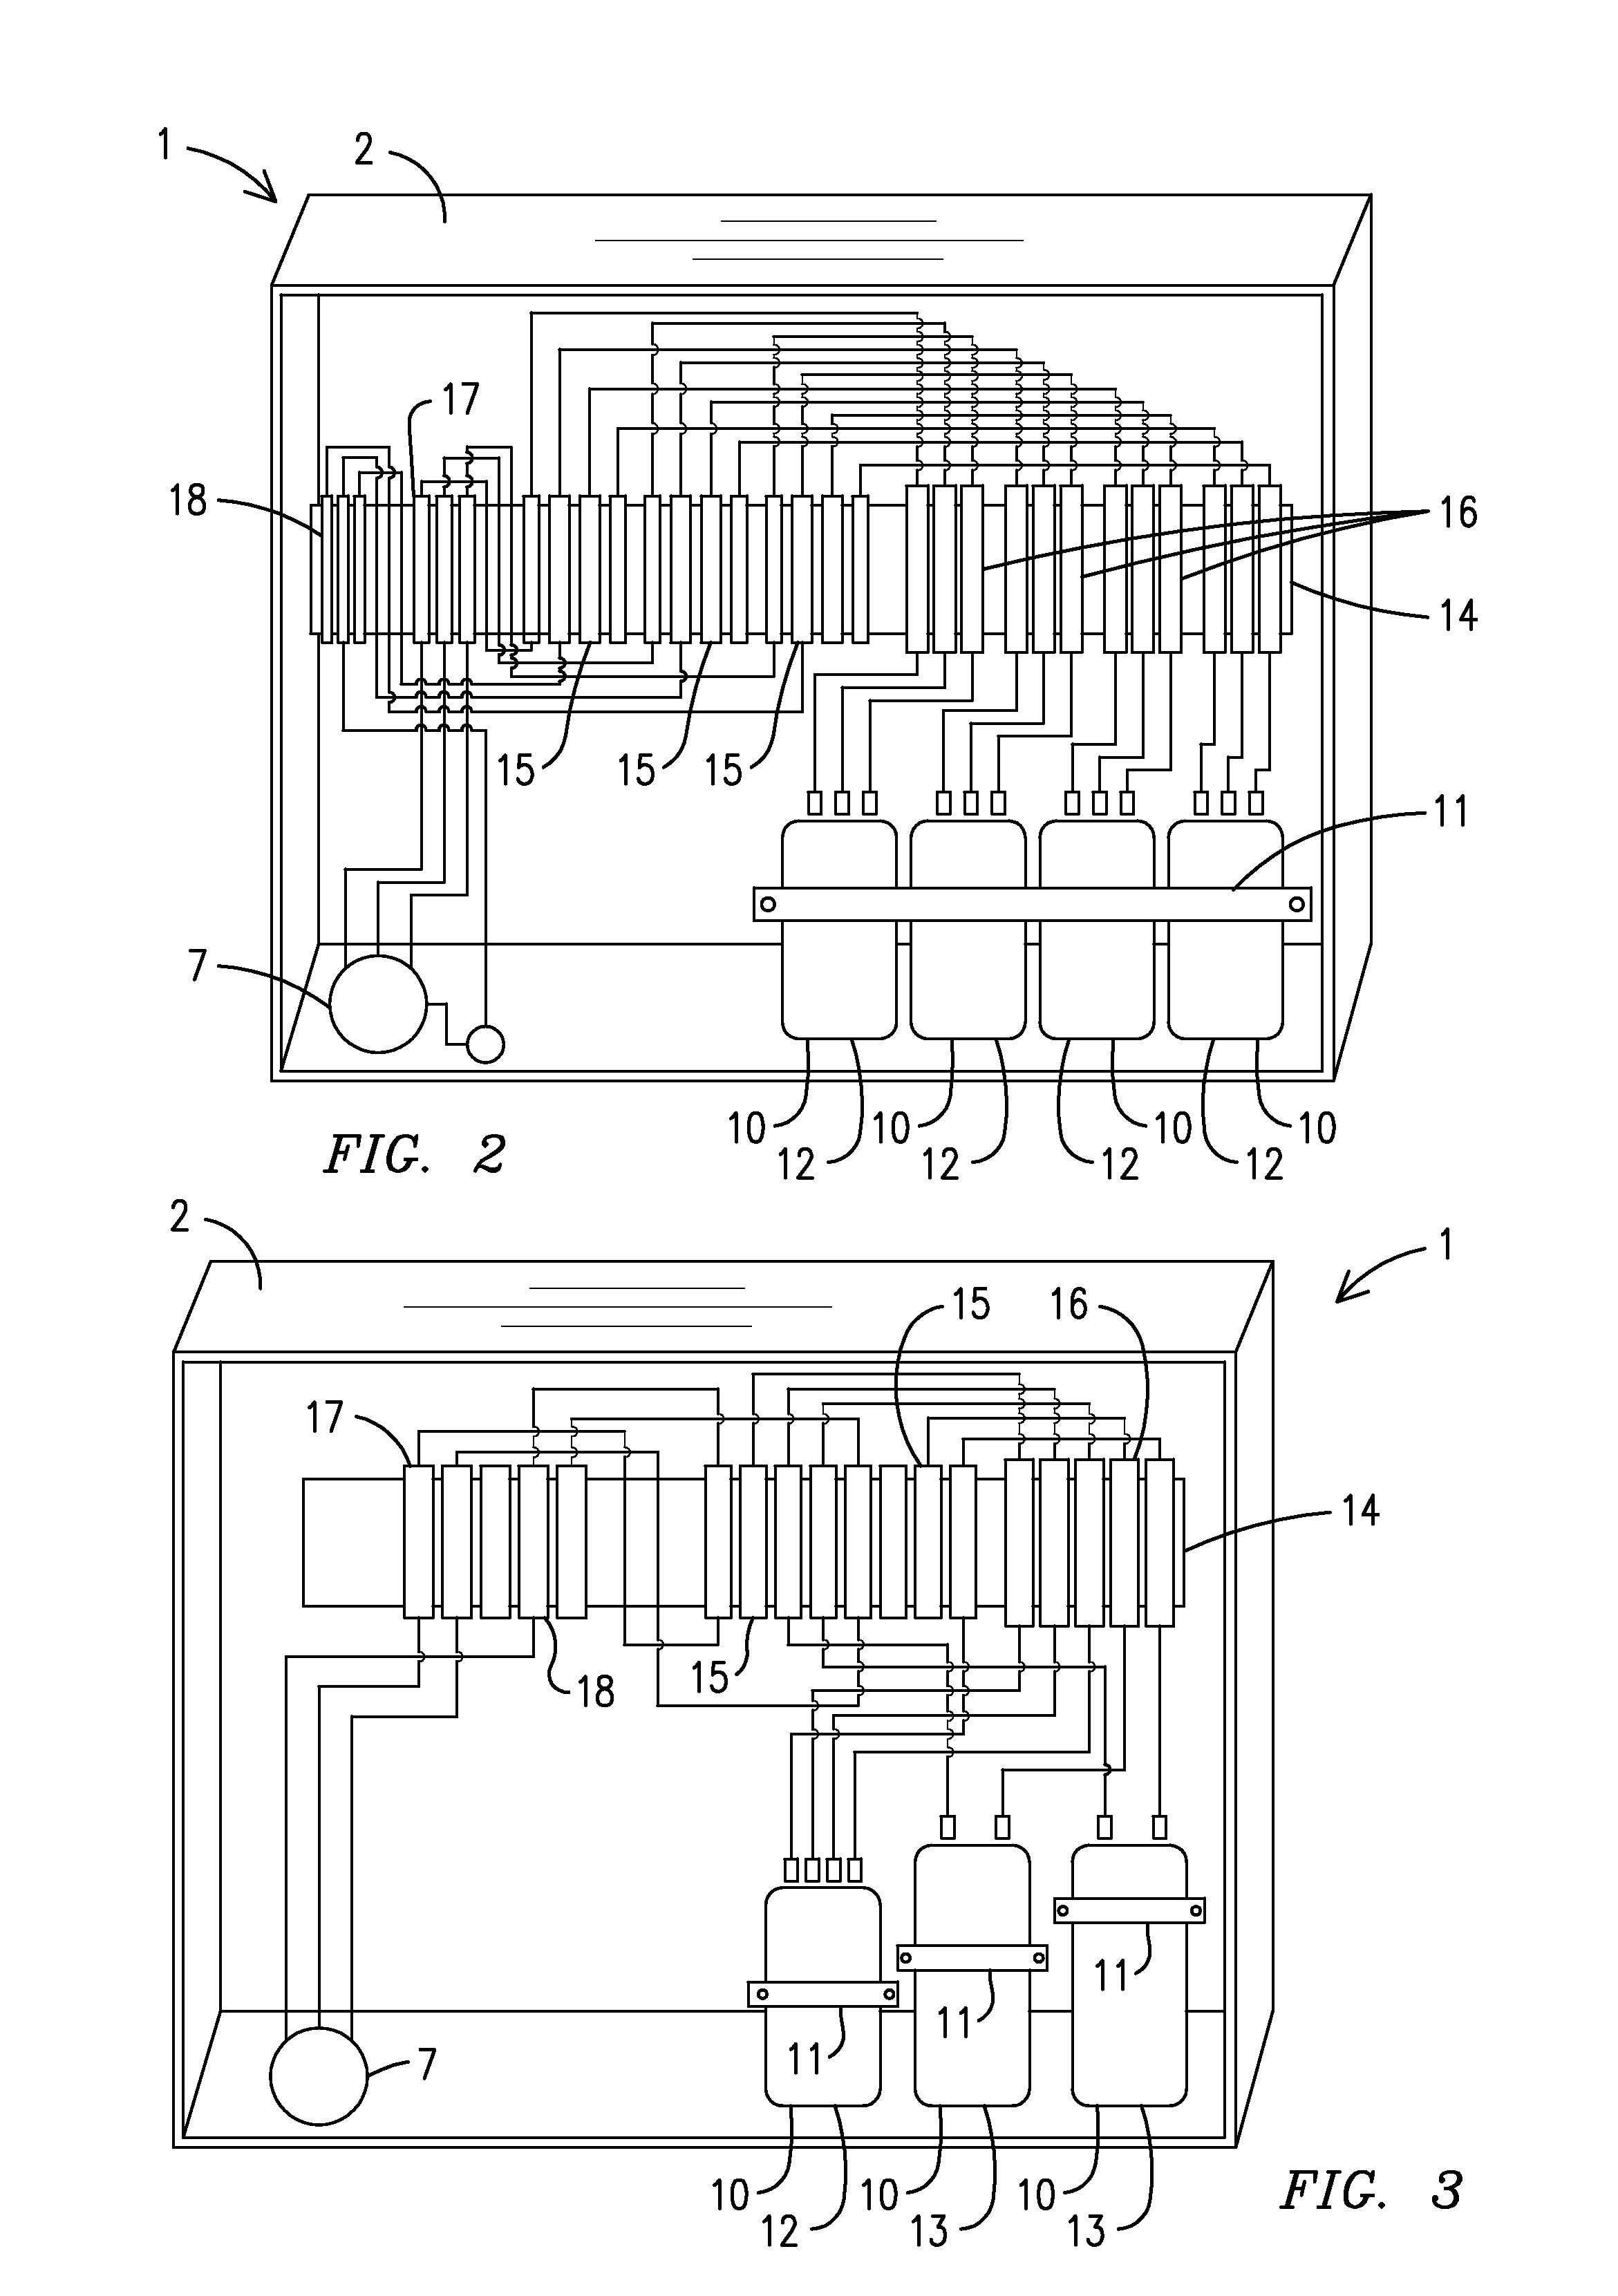 Power factor correction device with adjustable capacitance